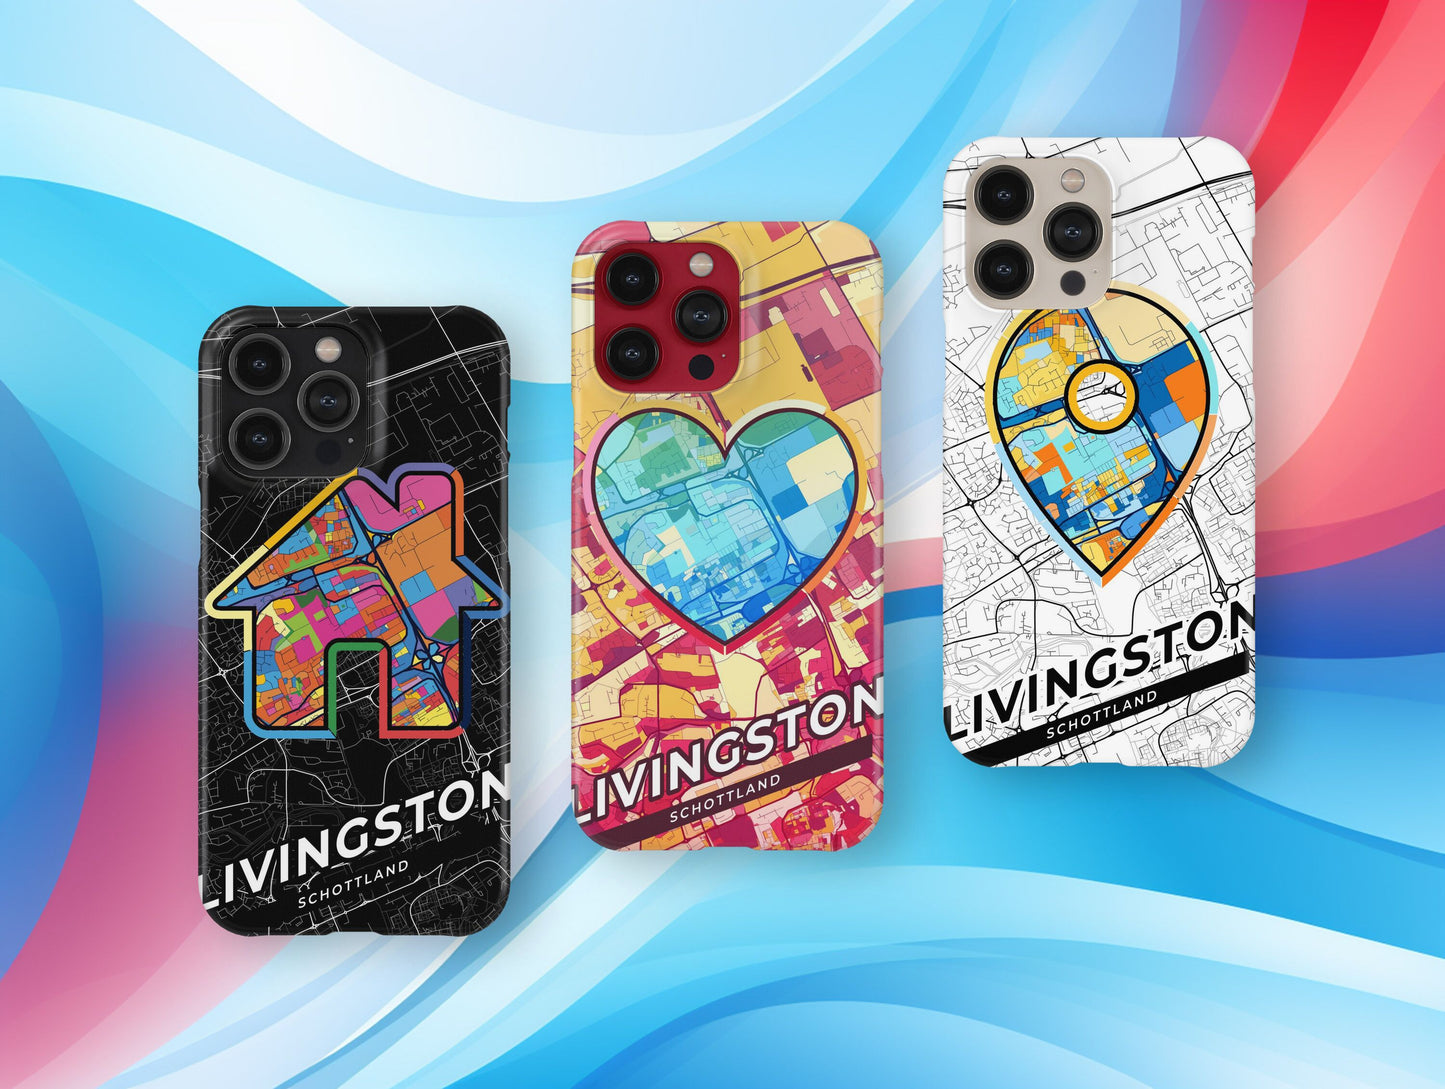 Livingston Scotland slim phone case with colorful icon. Birthday, wedding or housewarming gift. Couple match cases.